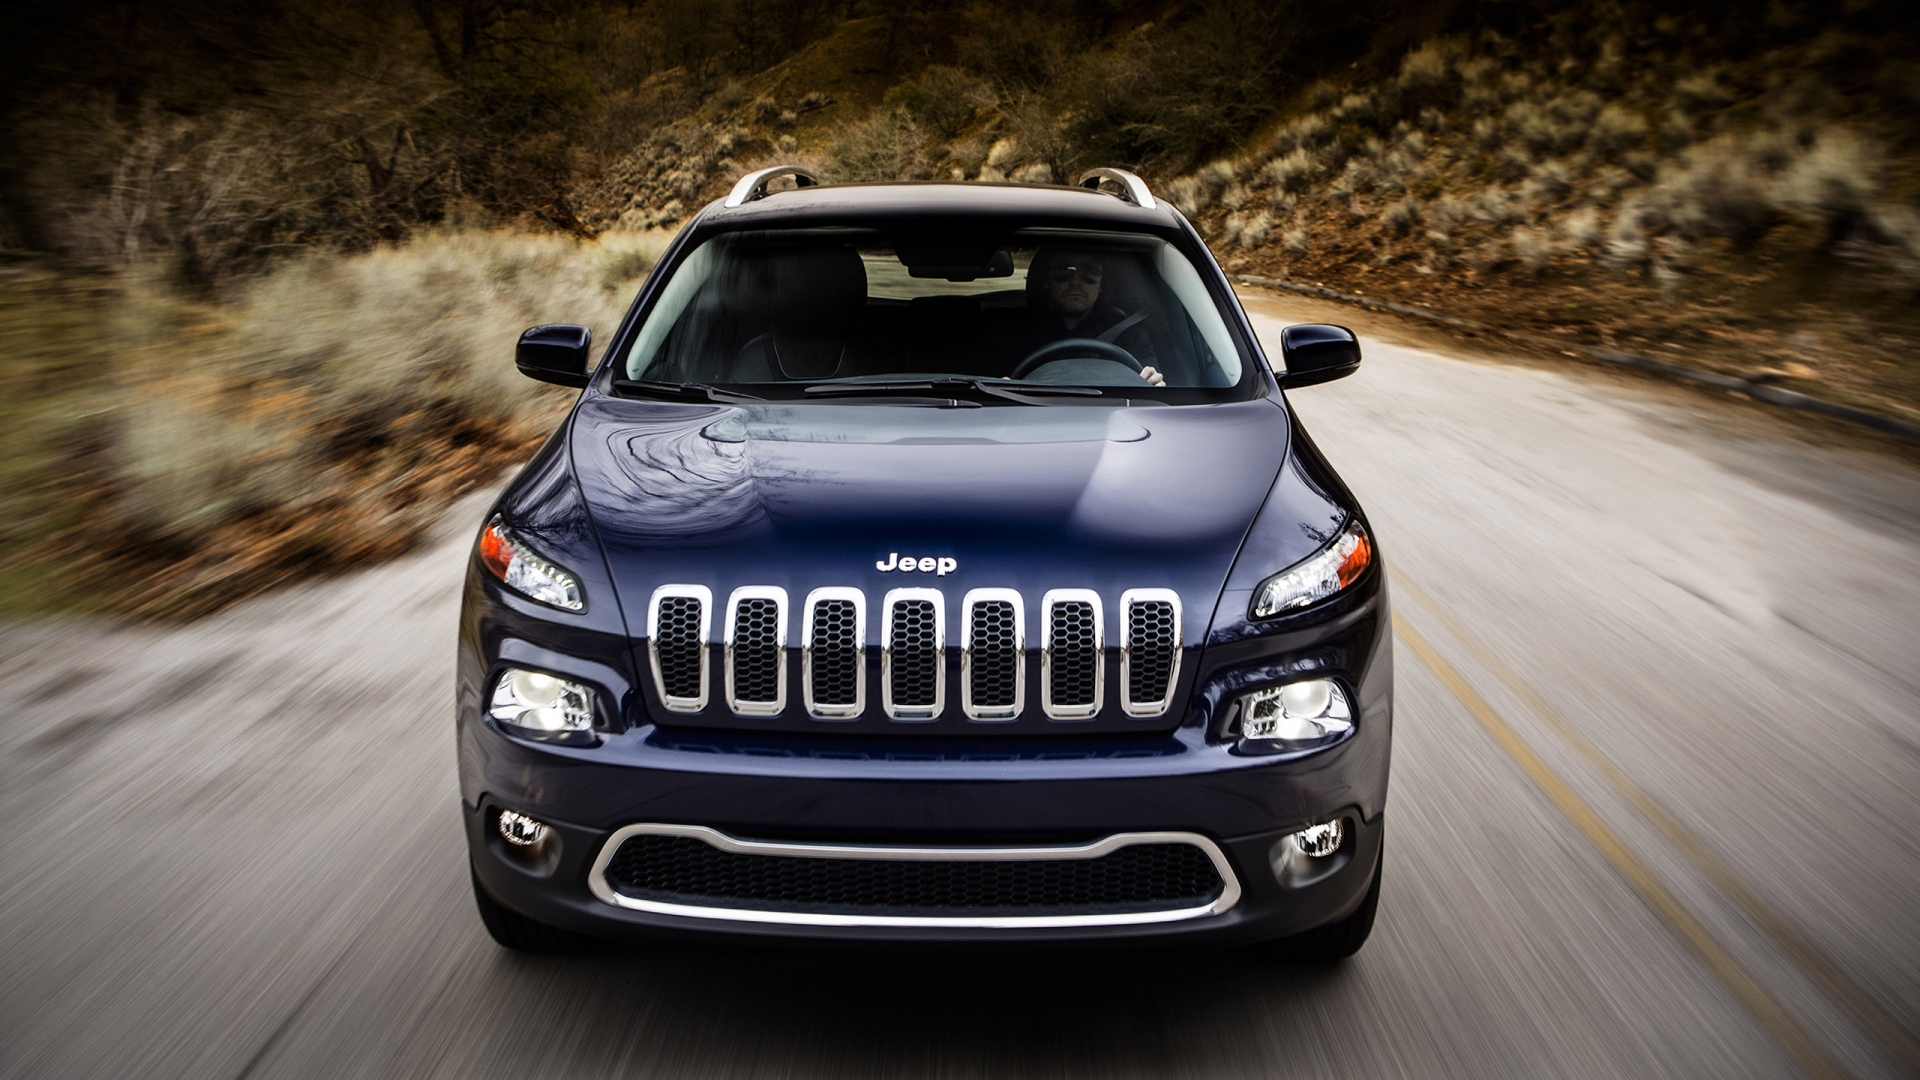 2014 Jeep Cherokee for 1920 x 1080 HDTV 1080p resolution